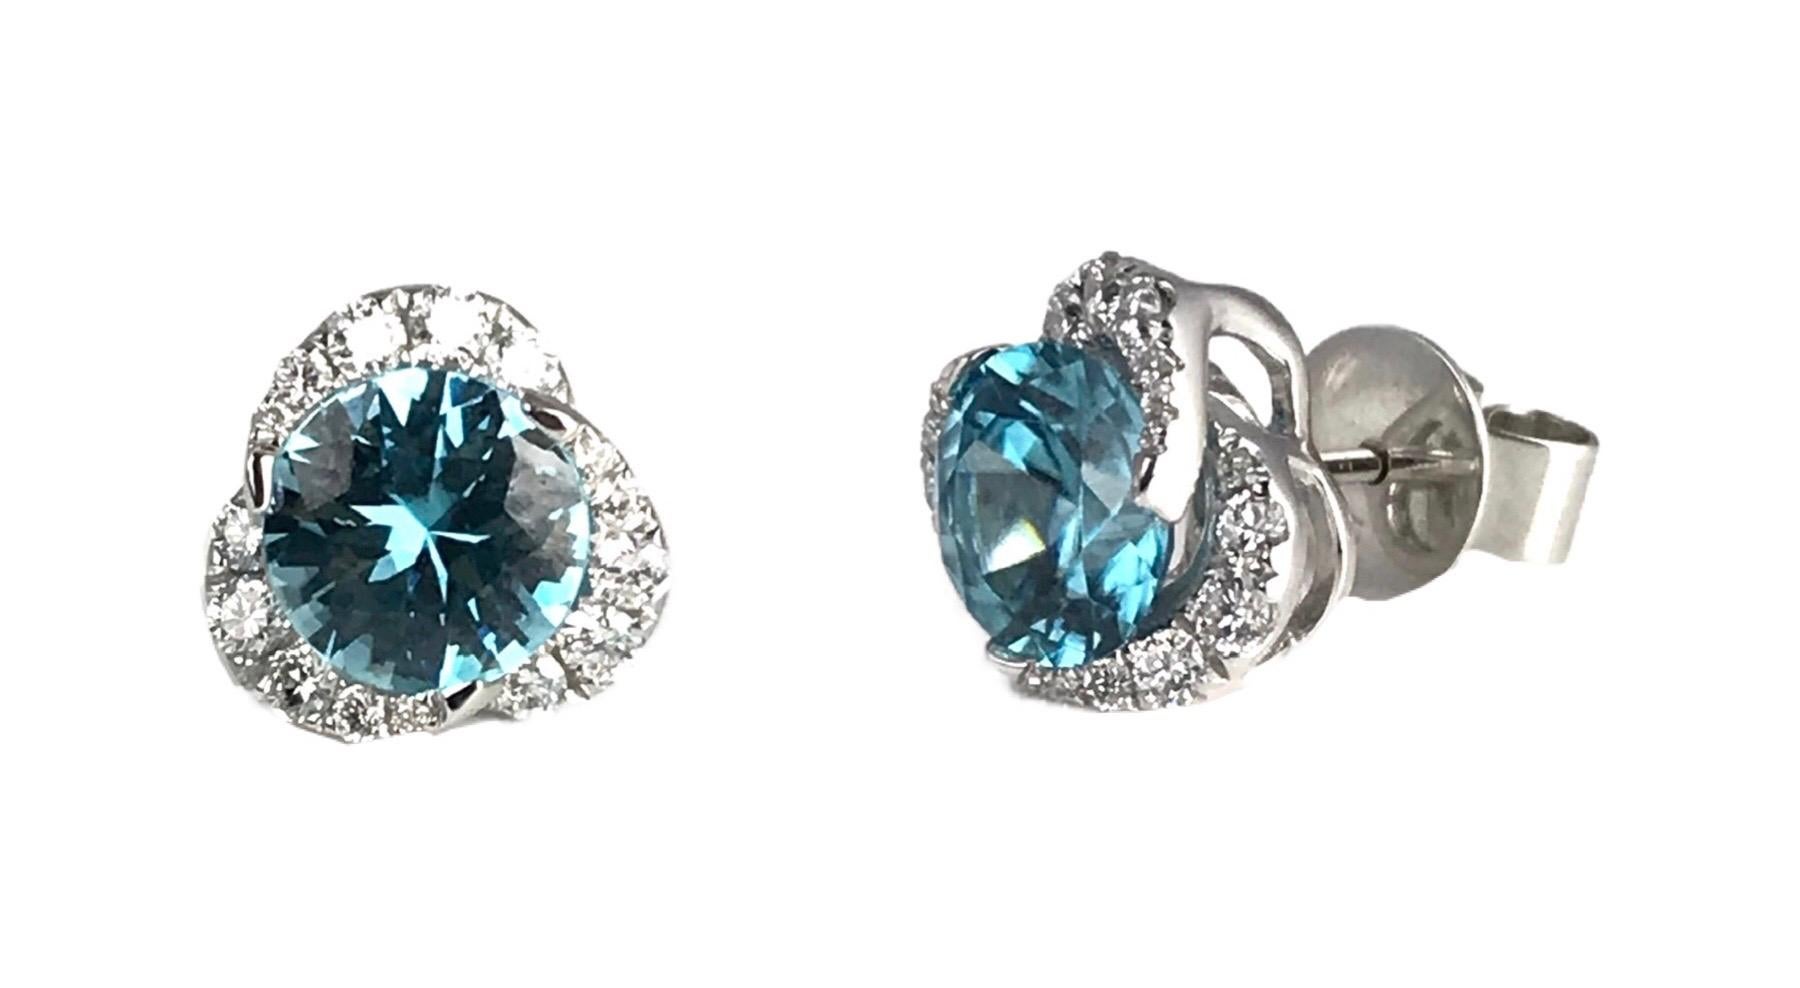 (DiamondTown) These earrings have 2.66 carats aqua blue zircon inside a graduated swirl of white diamonds. The total diamond weight is 0.48 carats.

Item details:
Center: 2.66 carats blue zircon, round
Diamonds: 0.48 carats
Set in 14k white